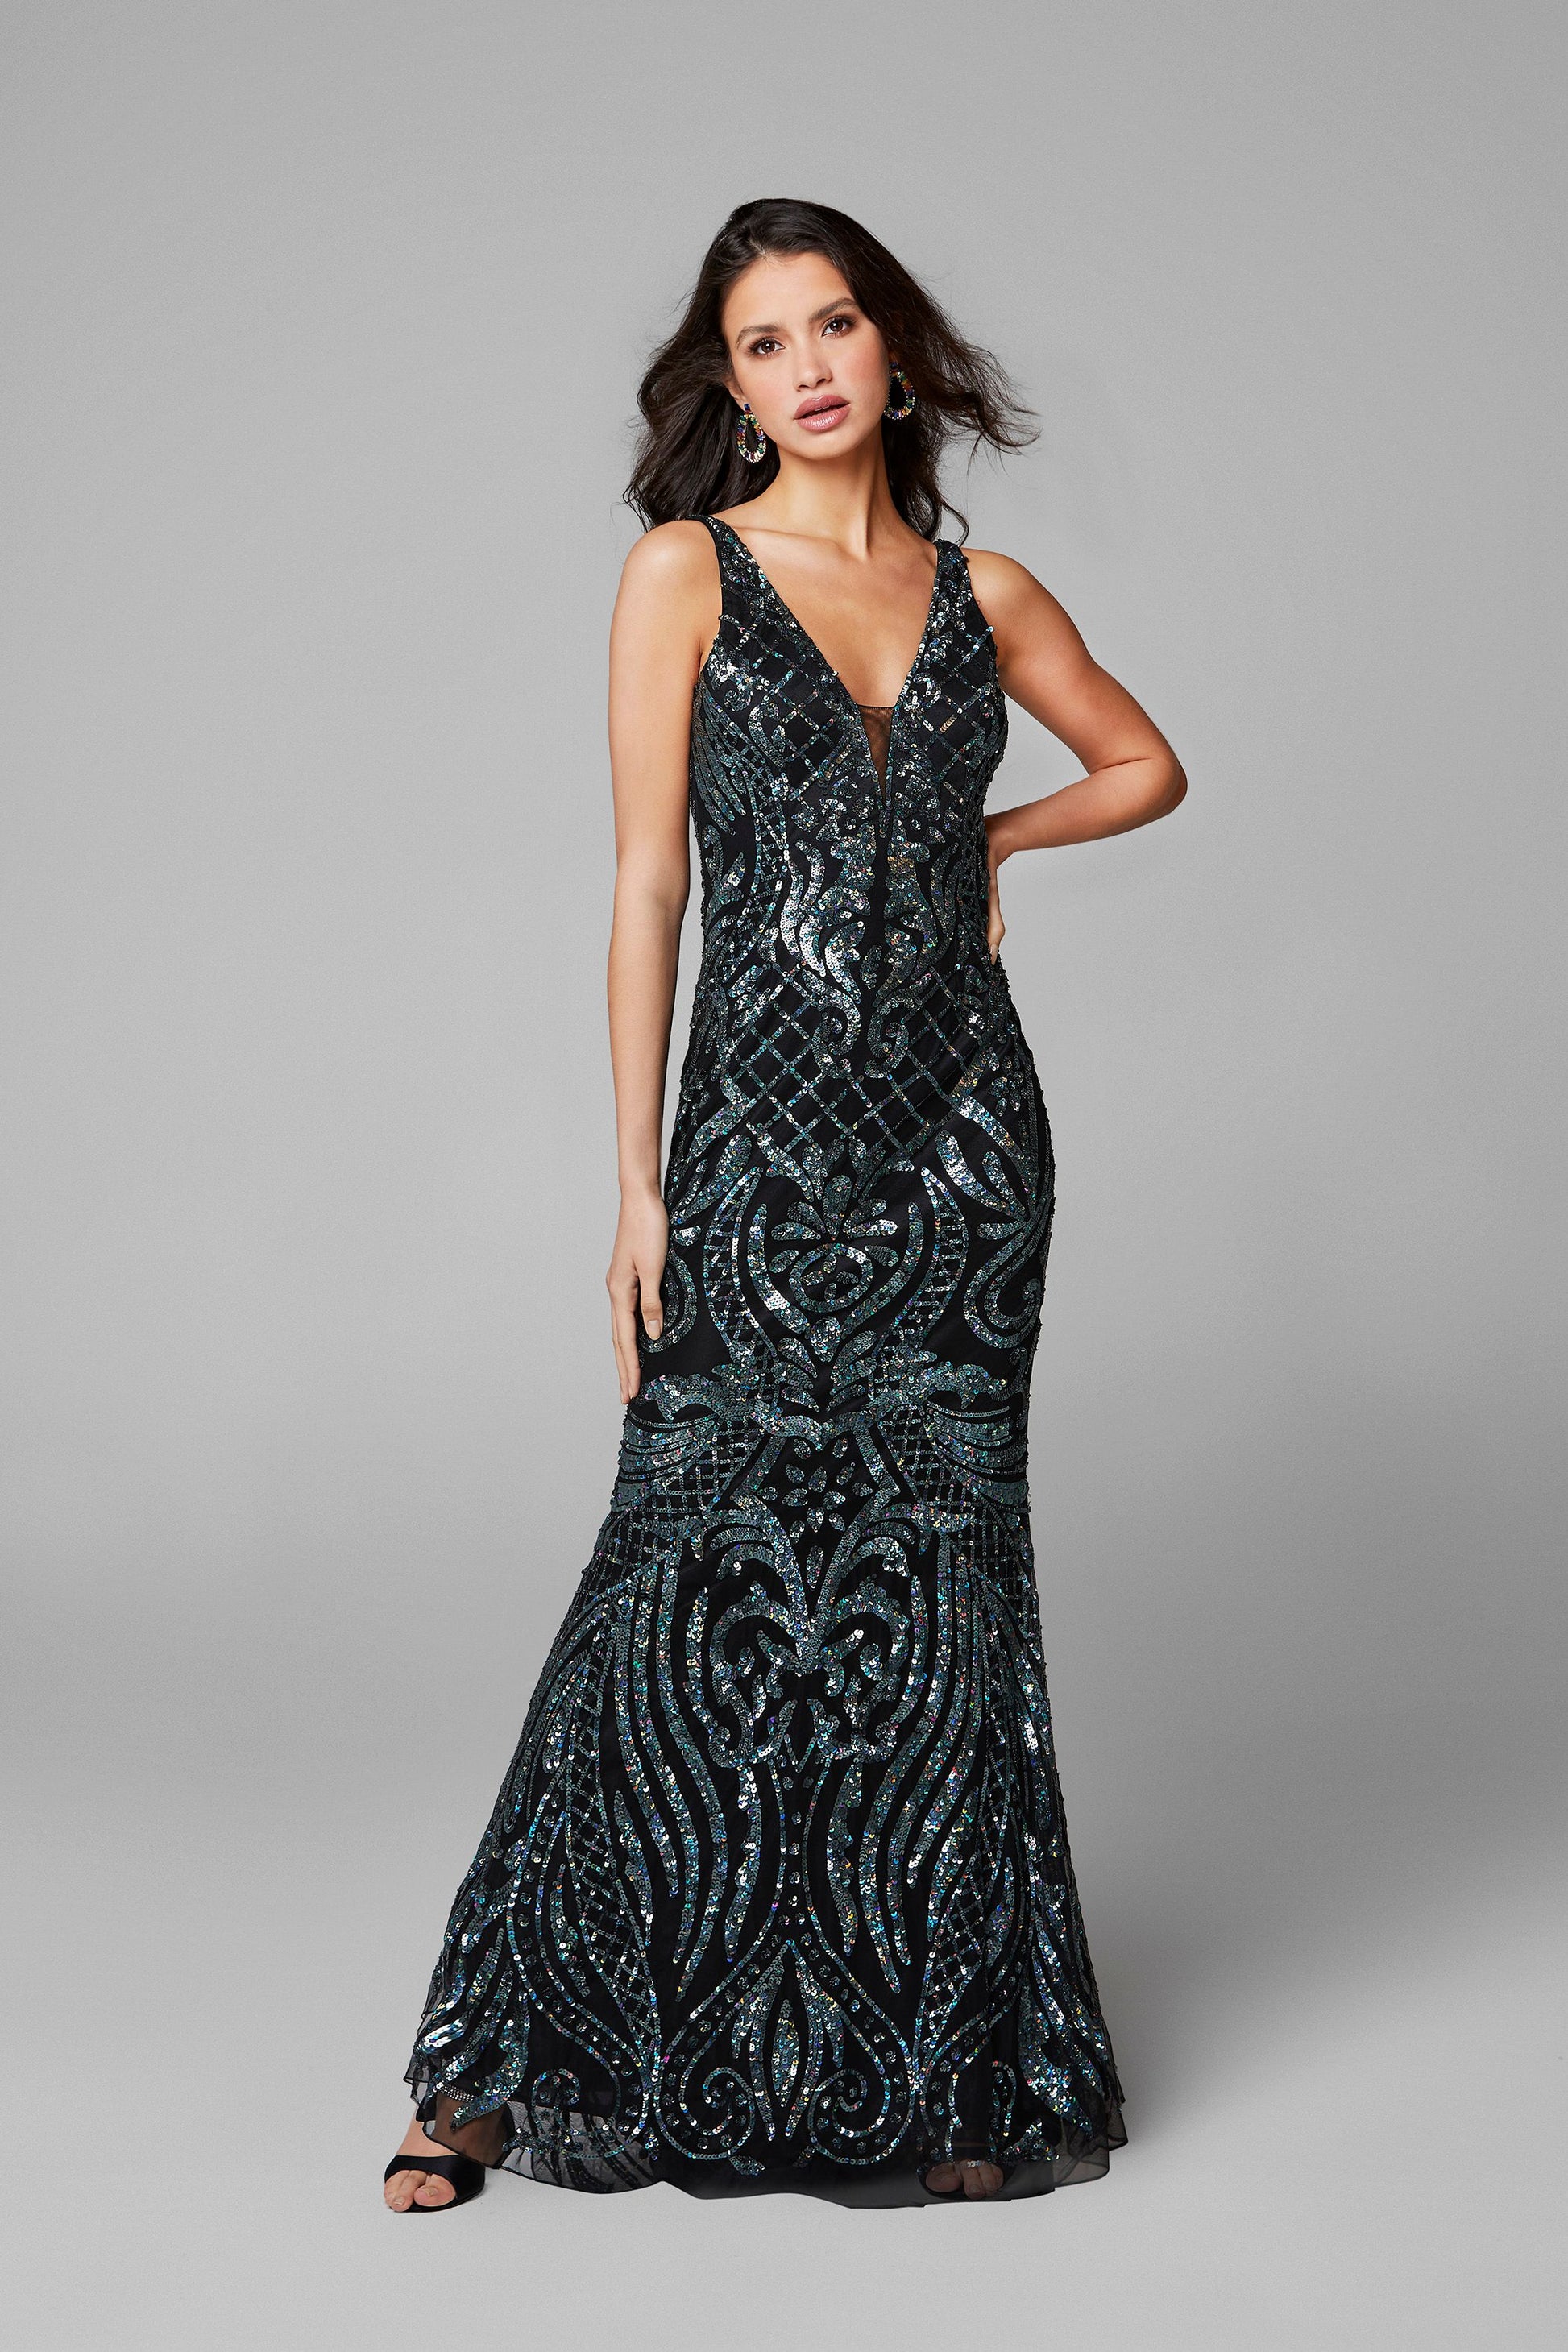 Primavera Couture 3612 is a long Fitted Sequin Embellished Formal Evening Gown. Featuring a Plunging Deep V Neckline. Elegant Sequin Embellishments scroll down throughout the length of this fit & Flare Prom Dress.  Available Sizes: 00,0,2,4,6,8,10,12,14,16,18  Available Colors: Black/Blue, Black/Multi, Ivory, Yellow